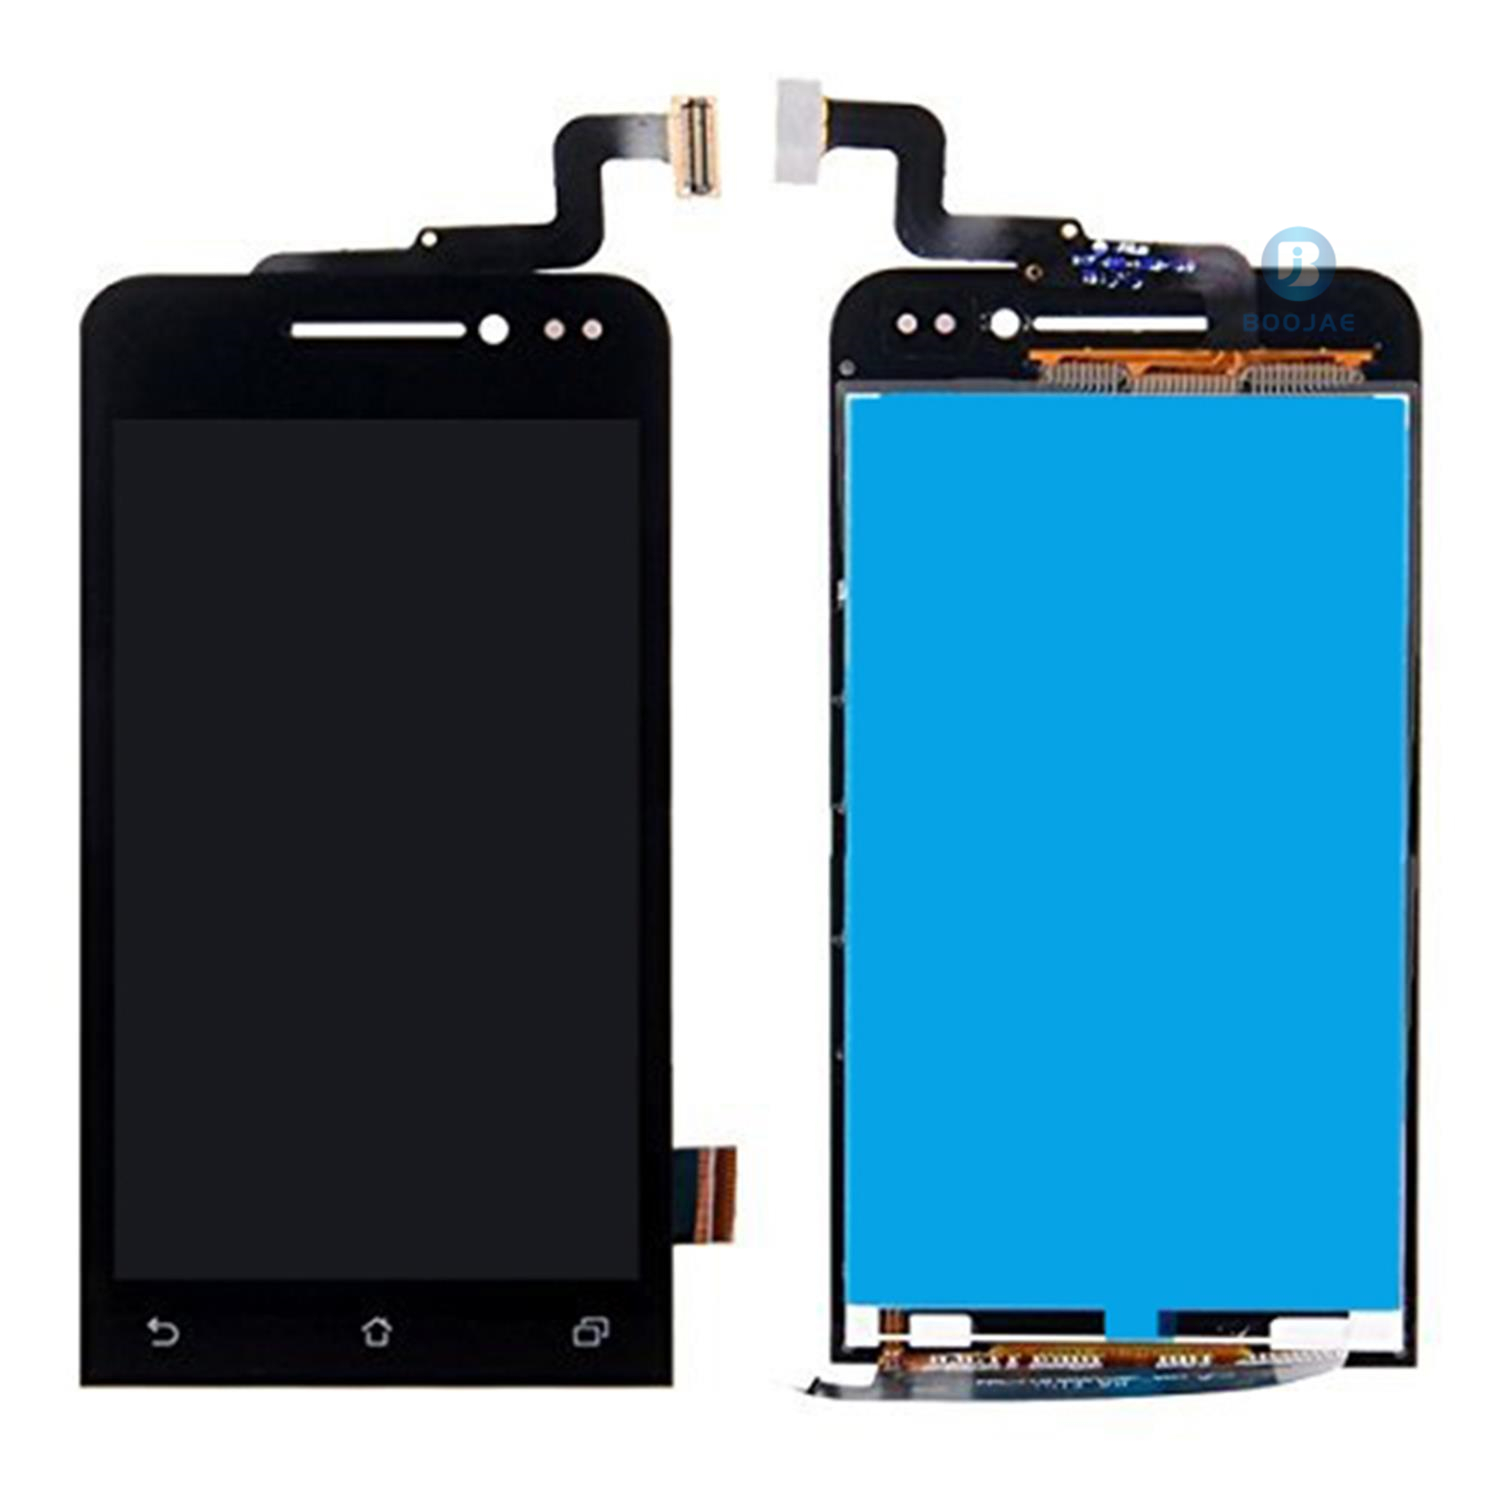 For Asus Zenfone A400CG LCD Screen Display and Touch Panel Digitizer Assembly Replacement